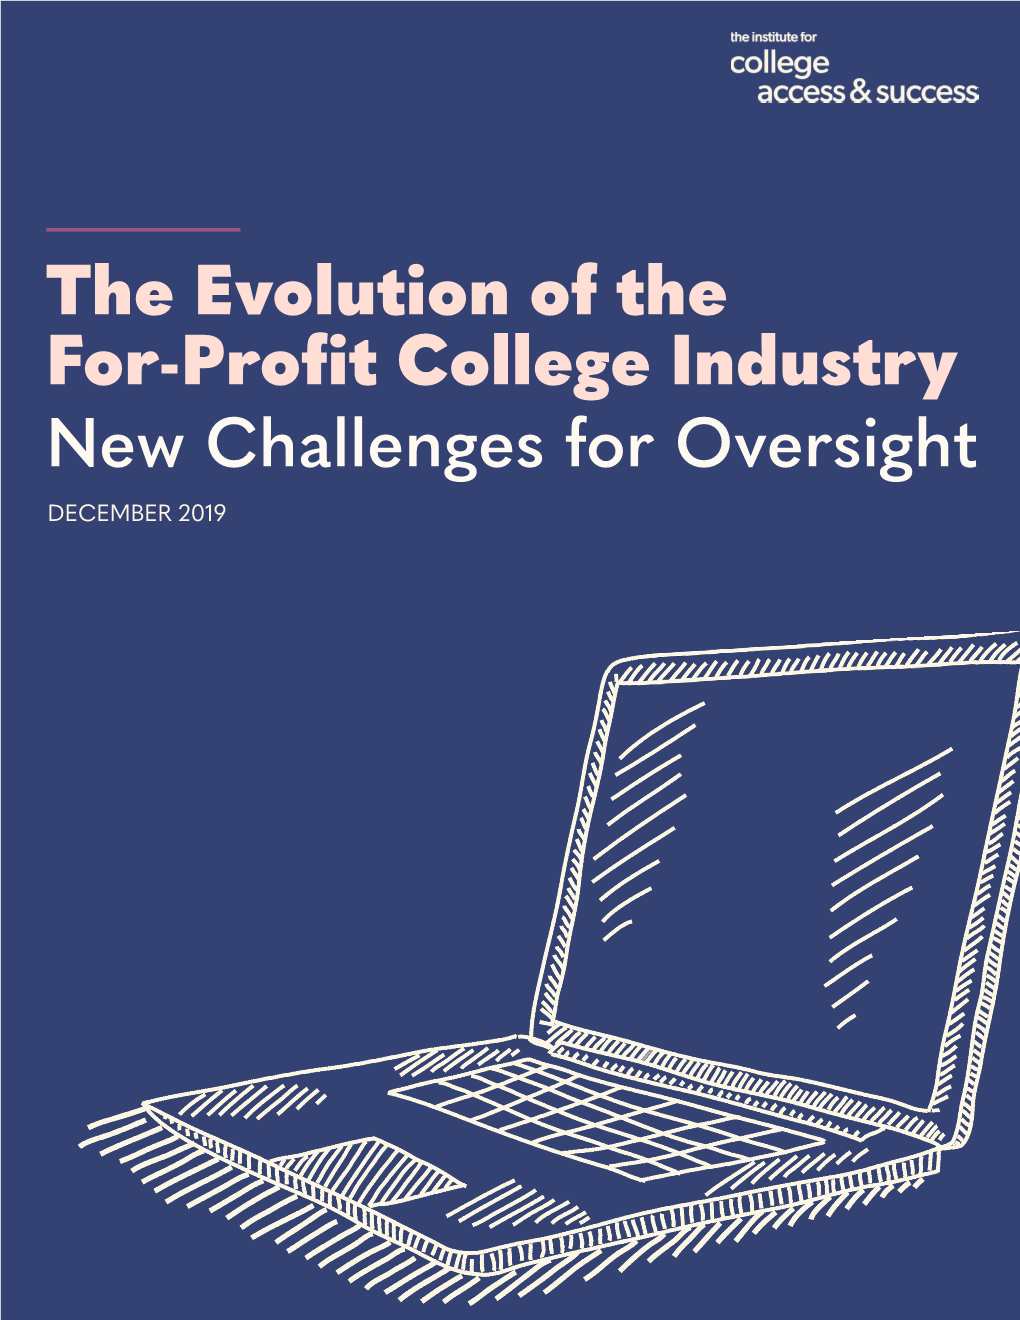 The Evolution of the For-Profit College Industry New Challenges for Oversight DECEMBER 2019 Acknowledgements